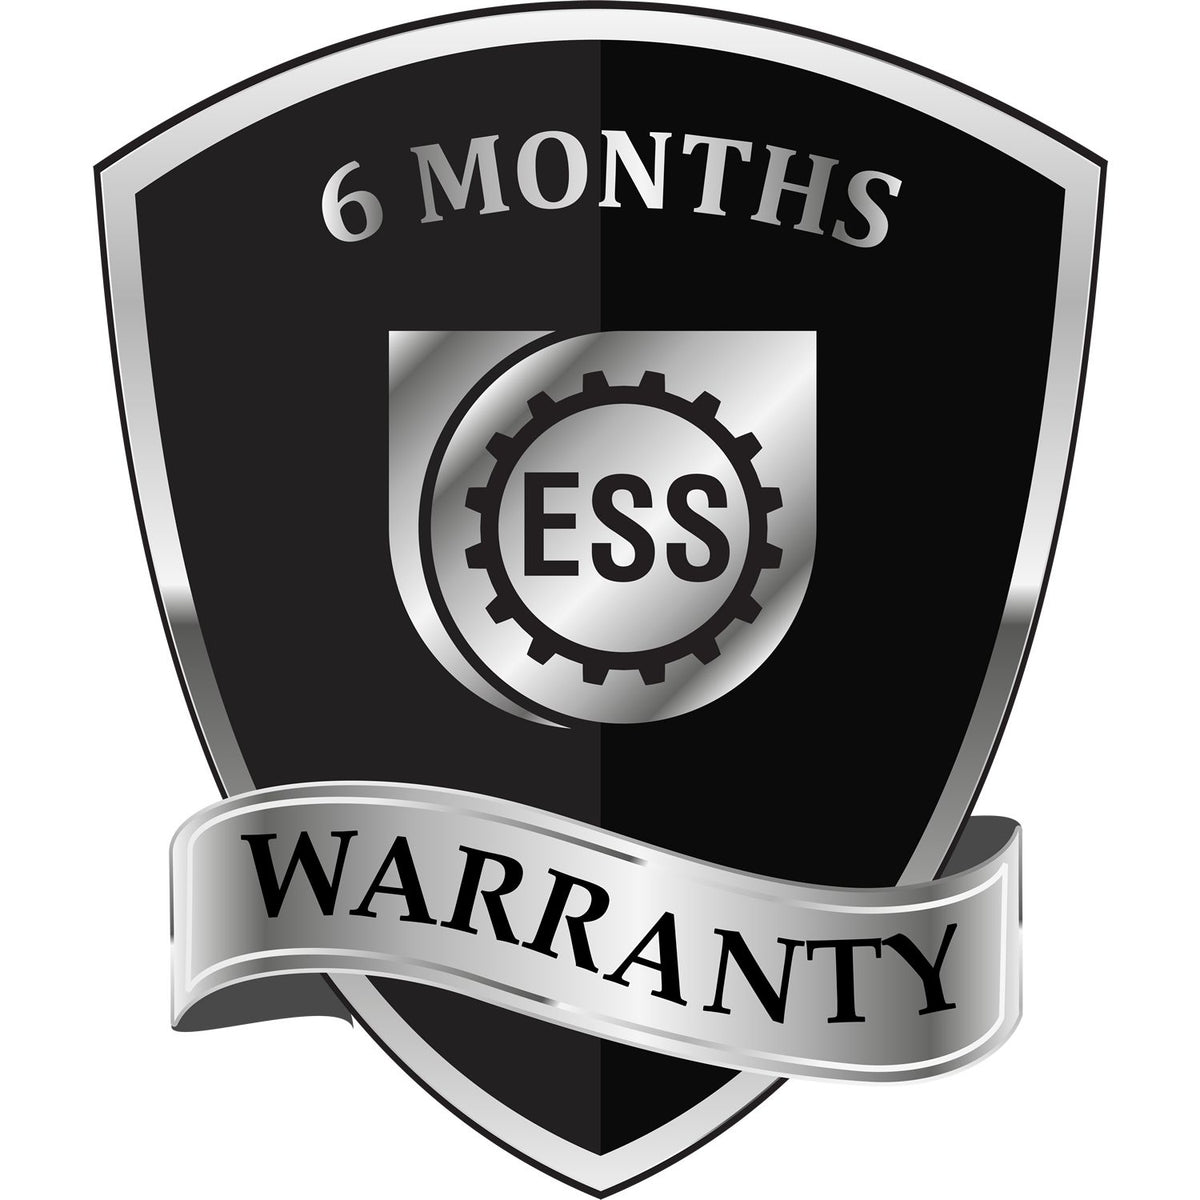 A badge or emblem showing a warranty icon for the PSI Wisconsin Notary Stamp